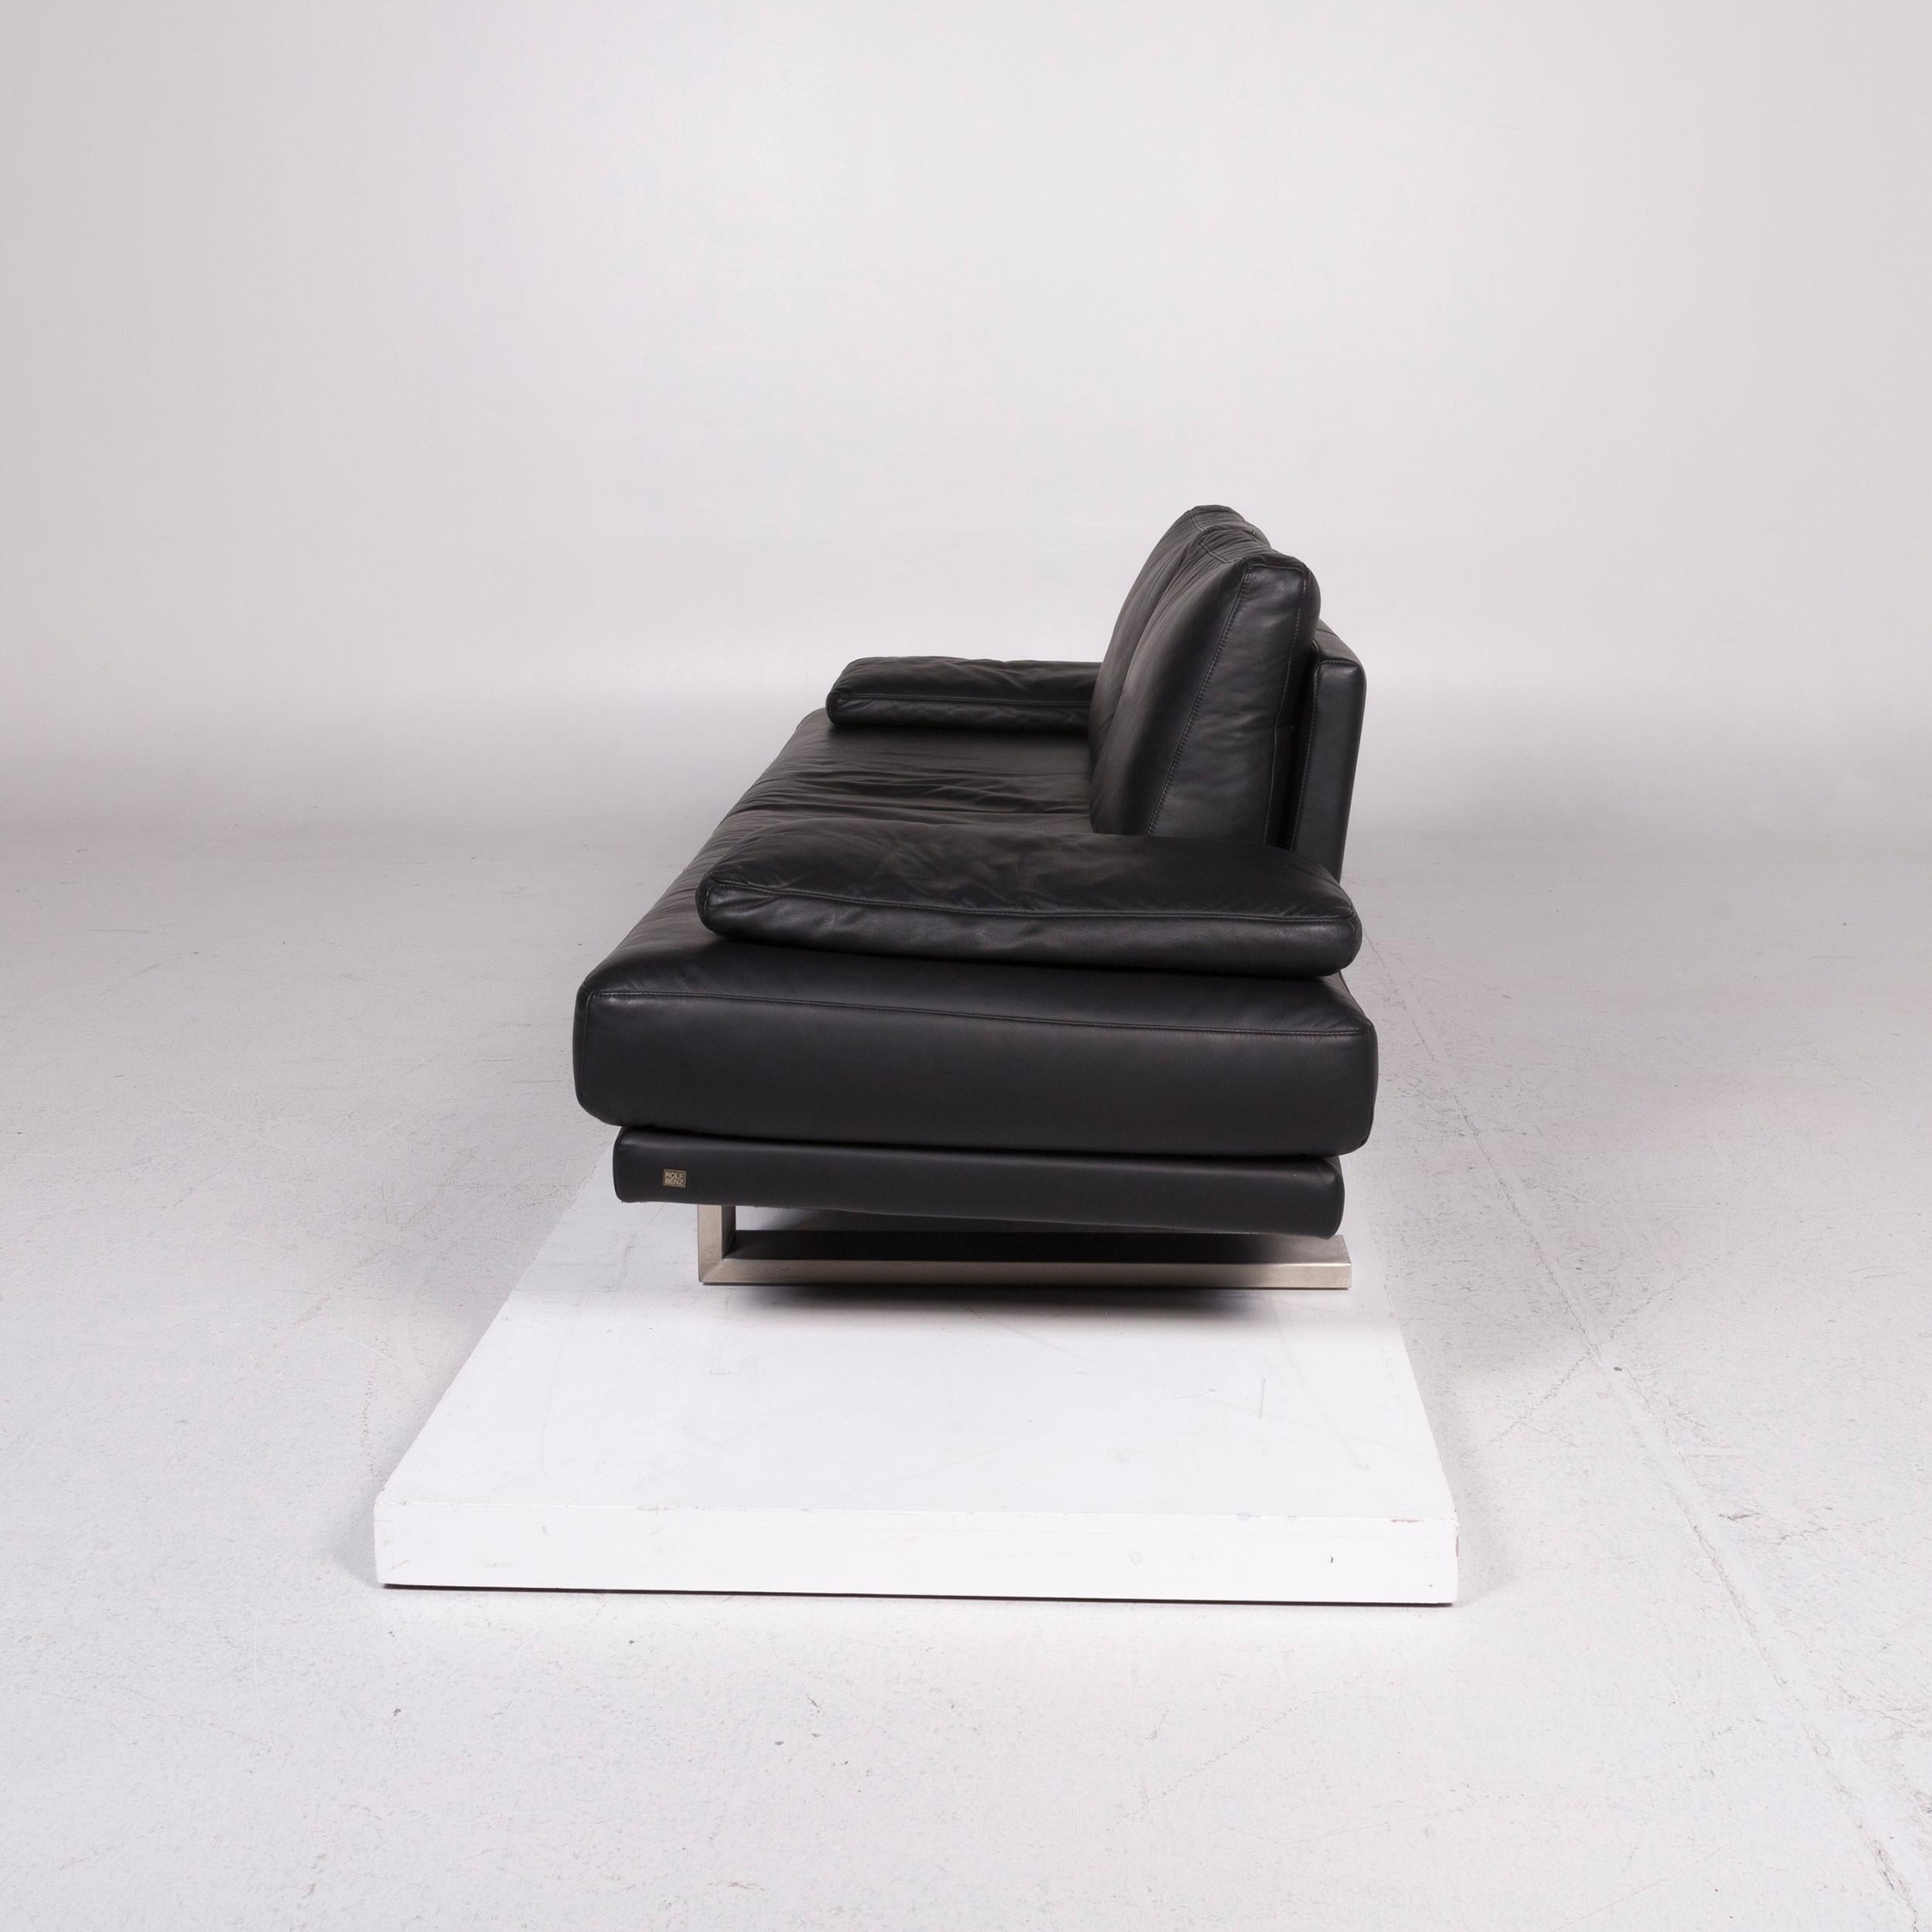 Rolf Benz 6600 Leather Sofa Black Two-Seat Couch For Sale at 1stDibs